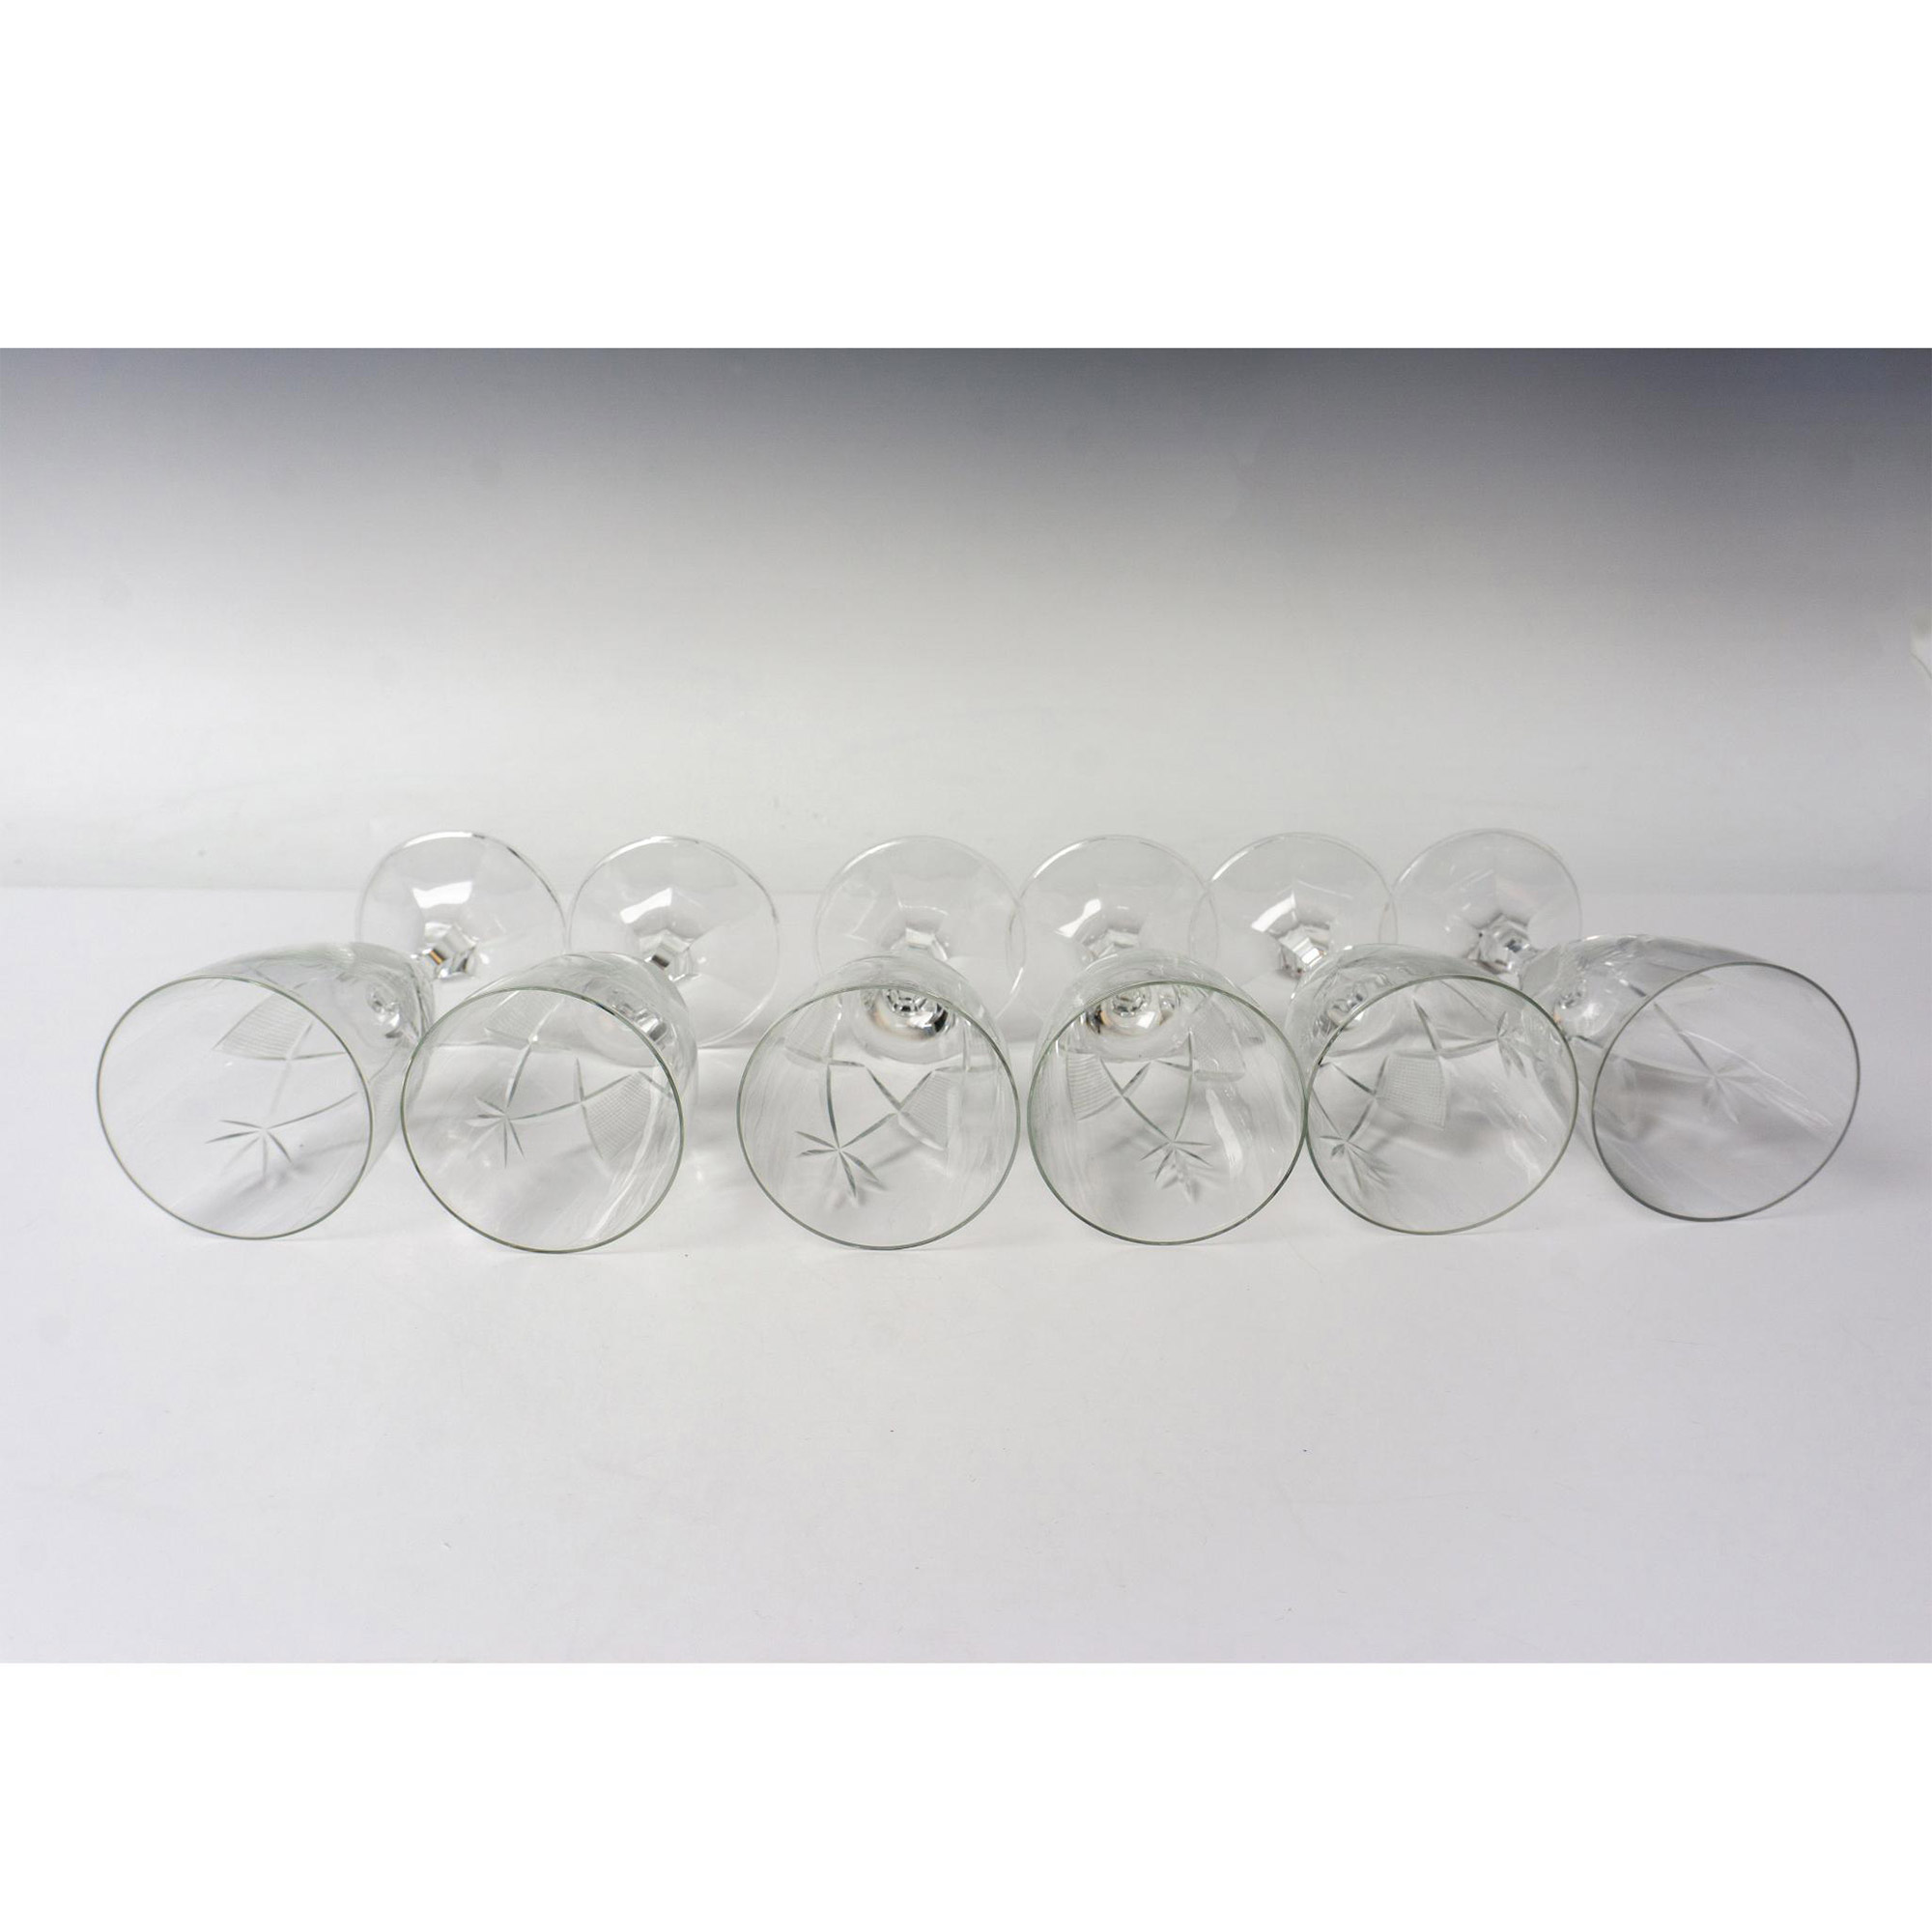 6pc Zwiesel Parfait Glasses - Image 4 of 5